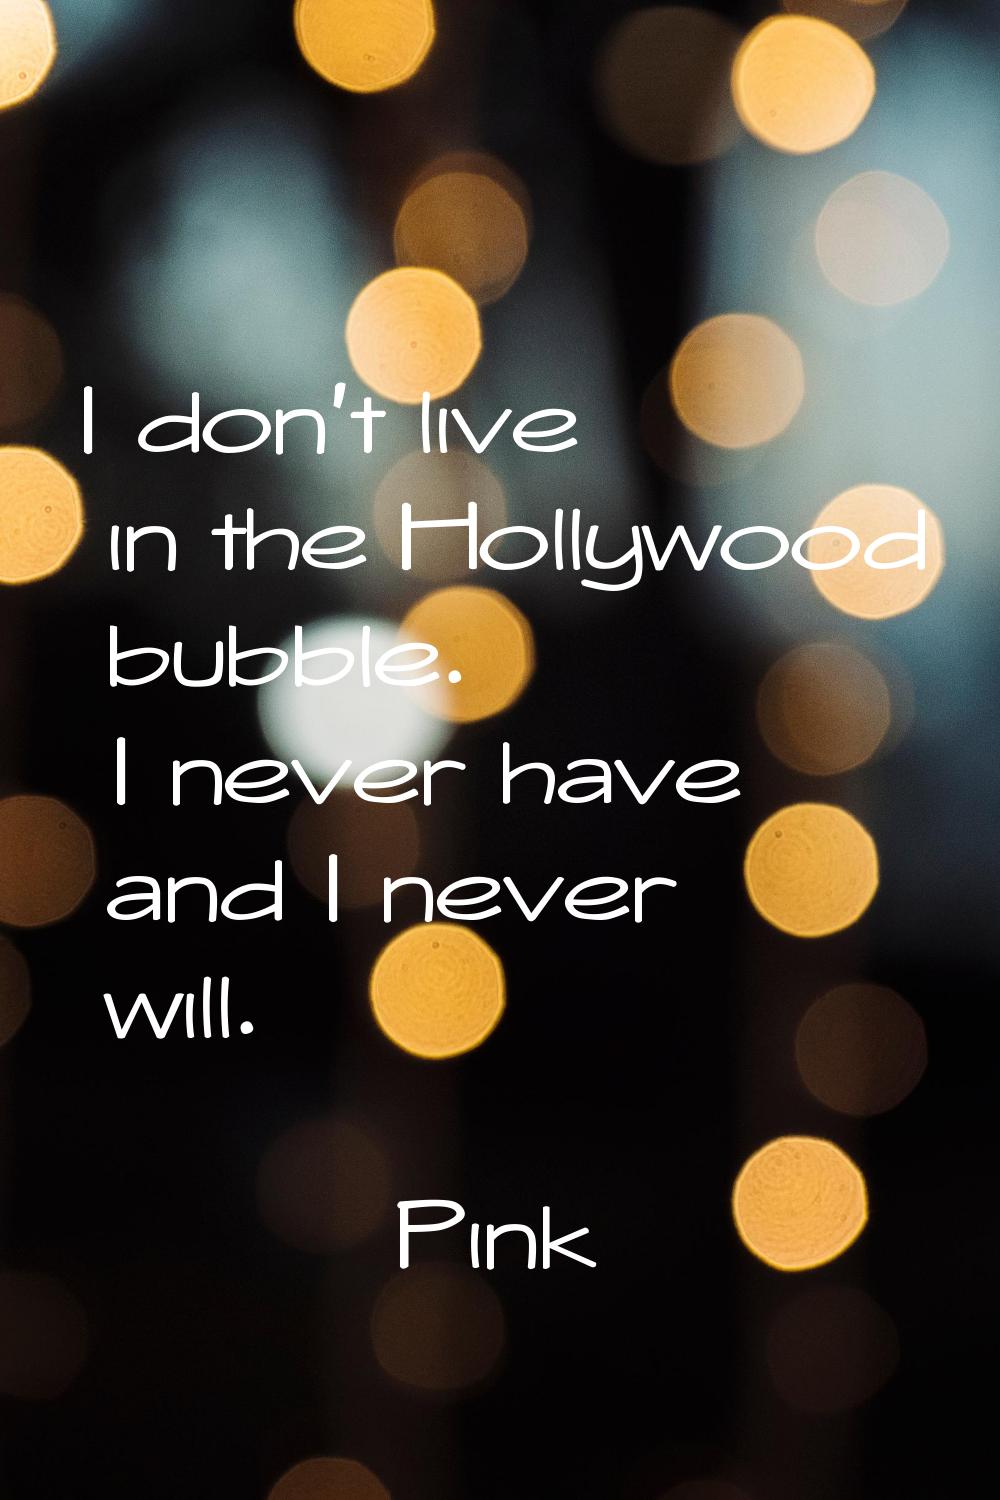 I don't live in the Hollywood bubble. I never have and I never will.